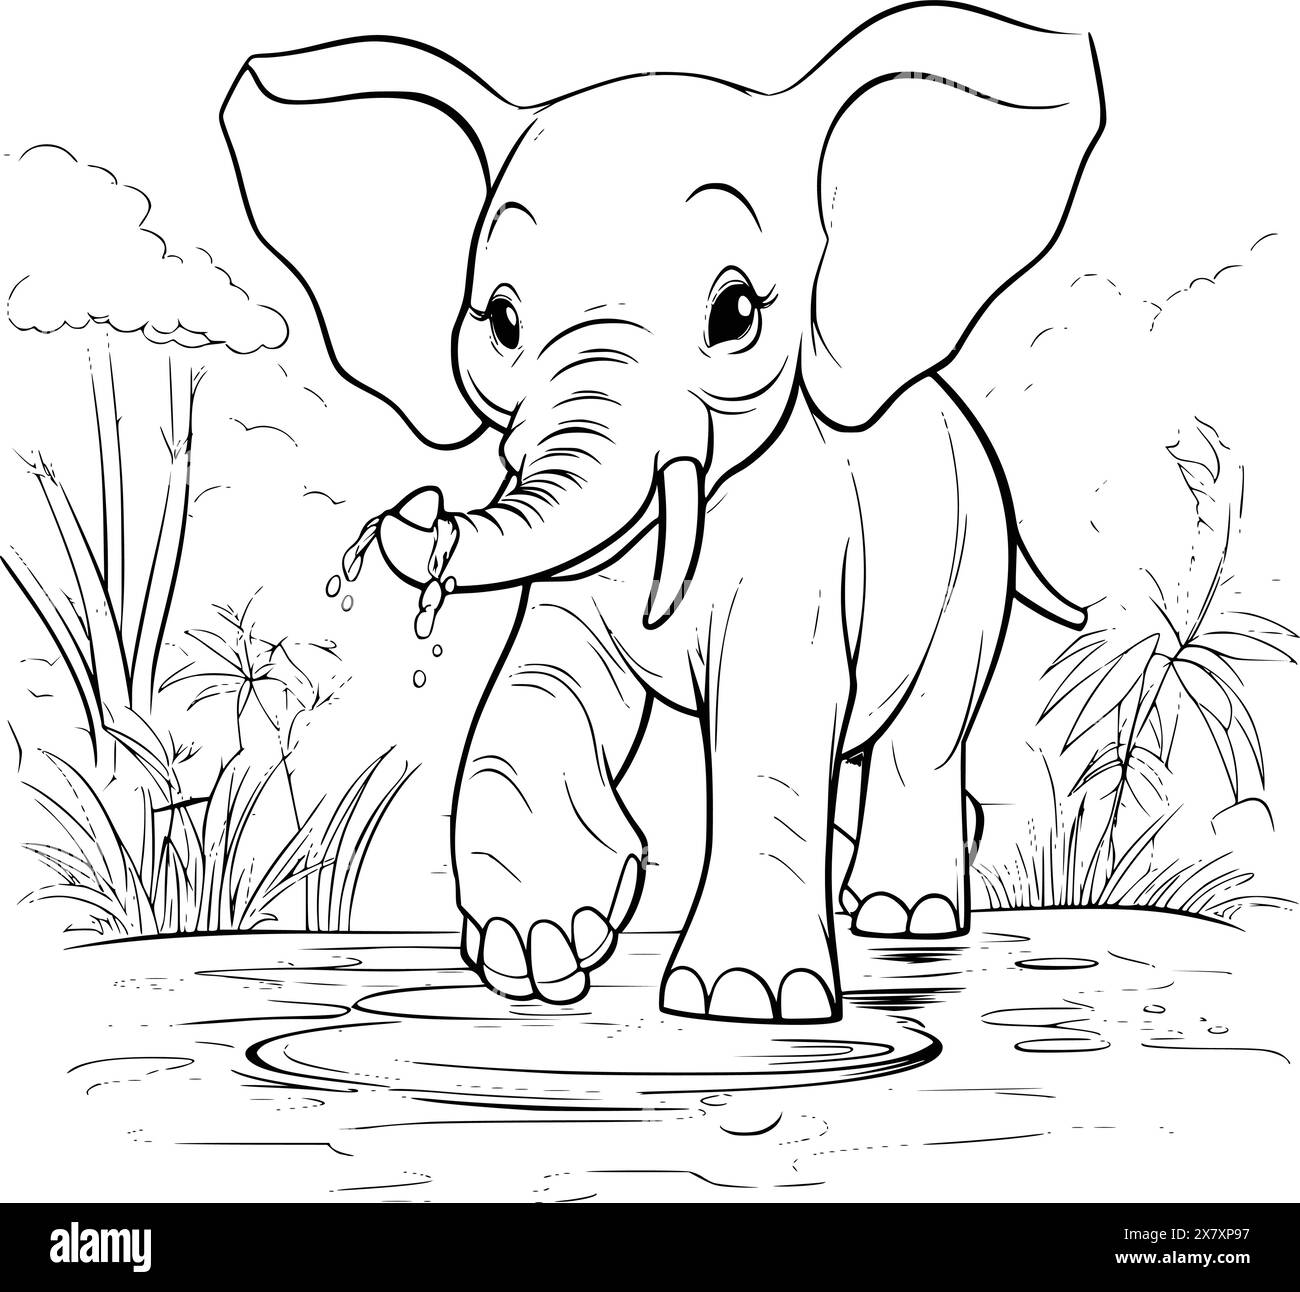 Elephant Playing In Water Coloring Page For Kids Stock Vector